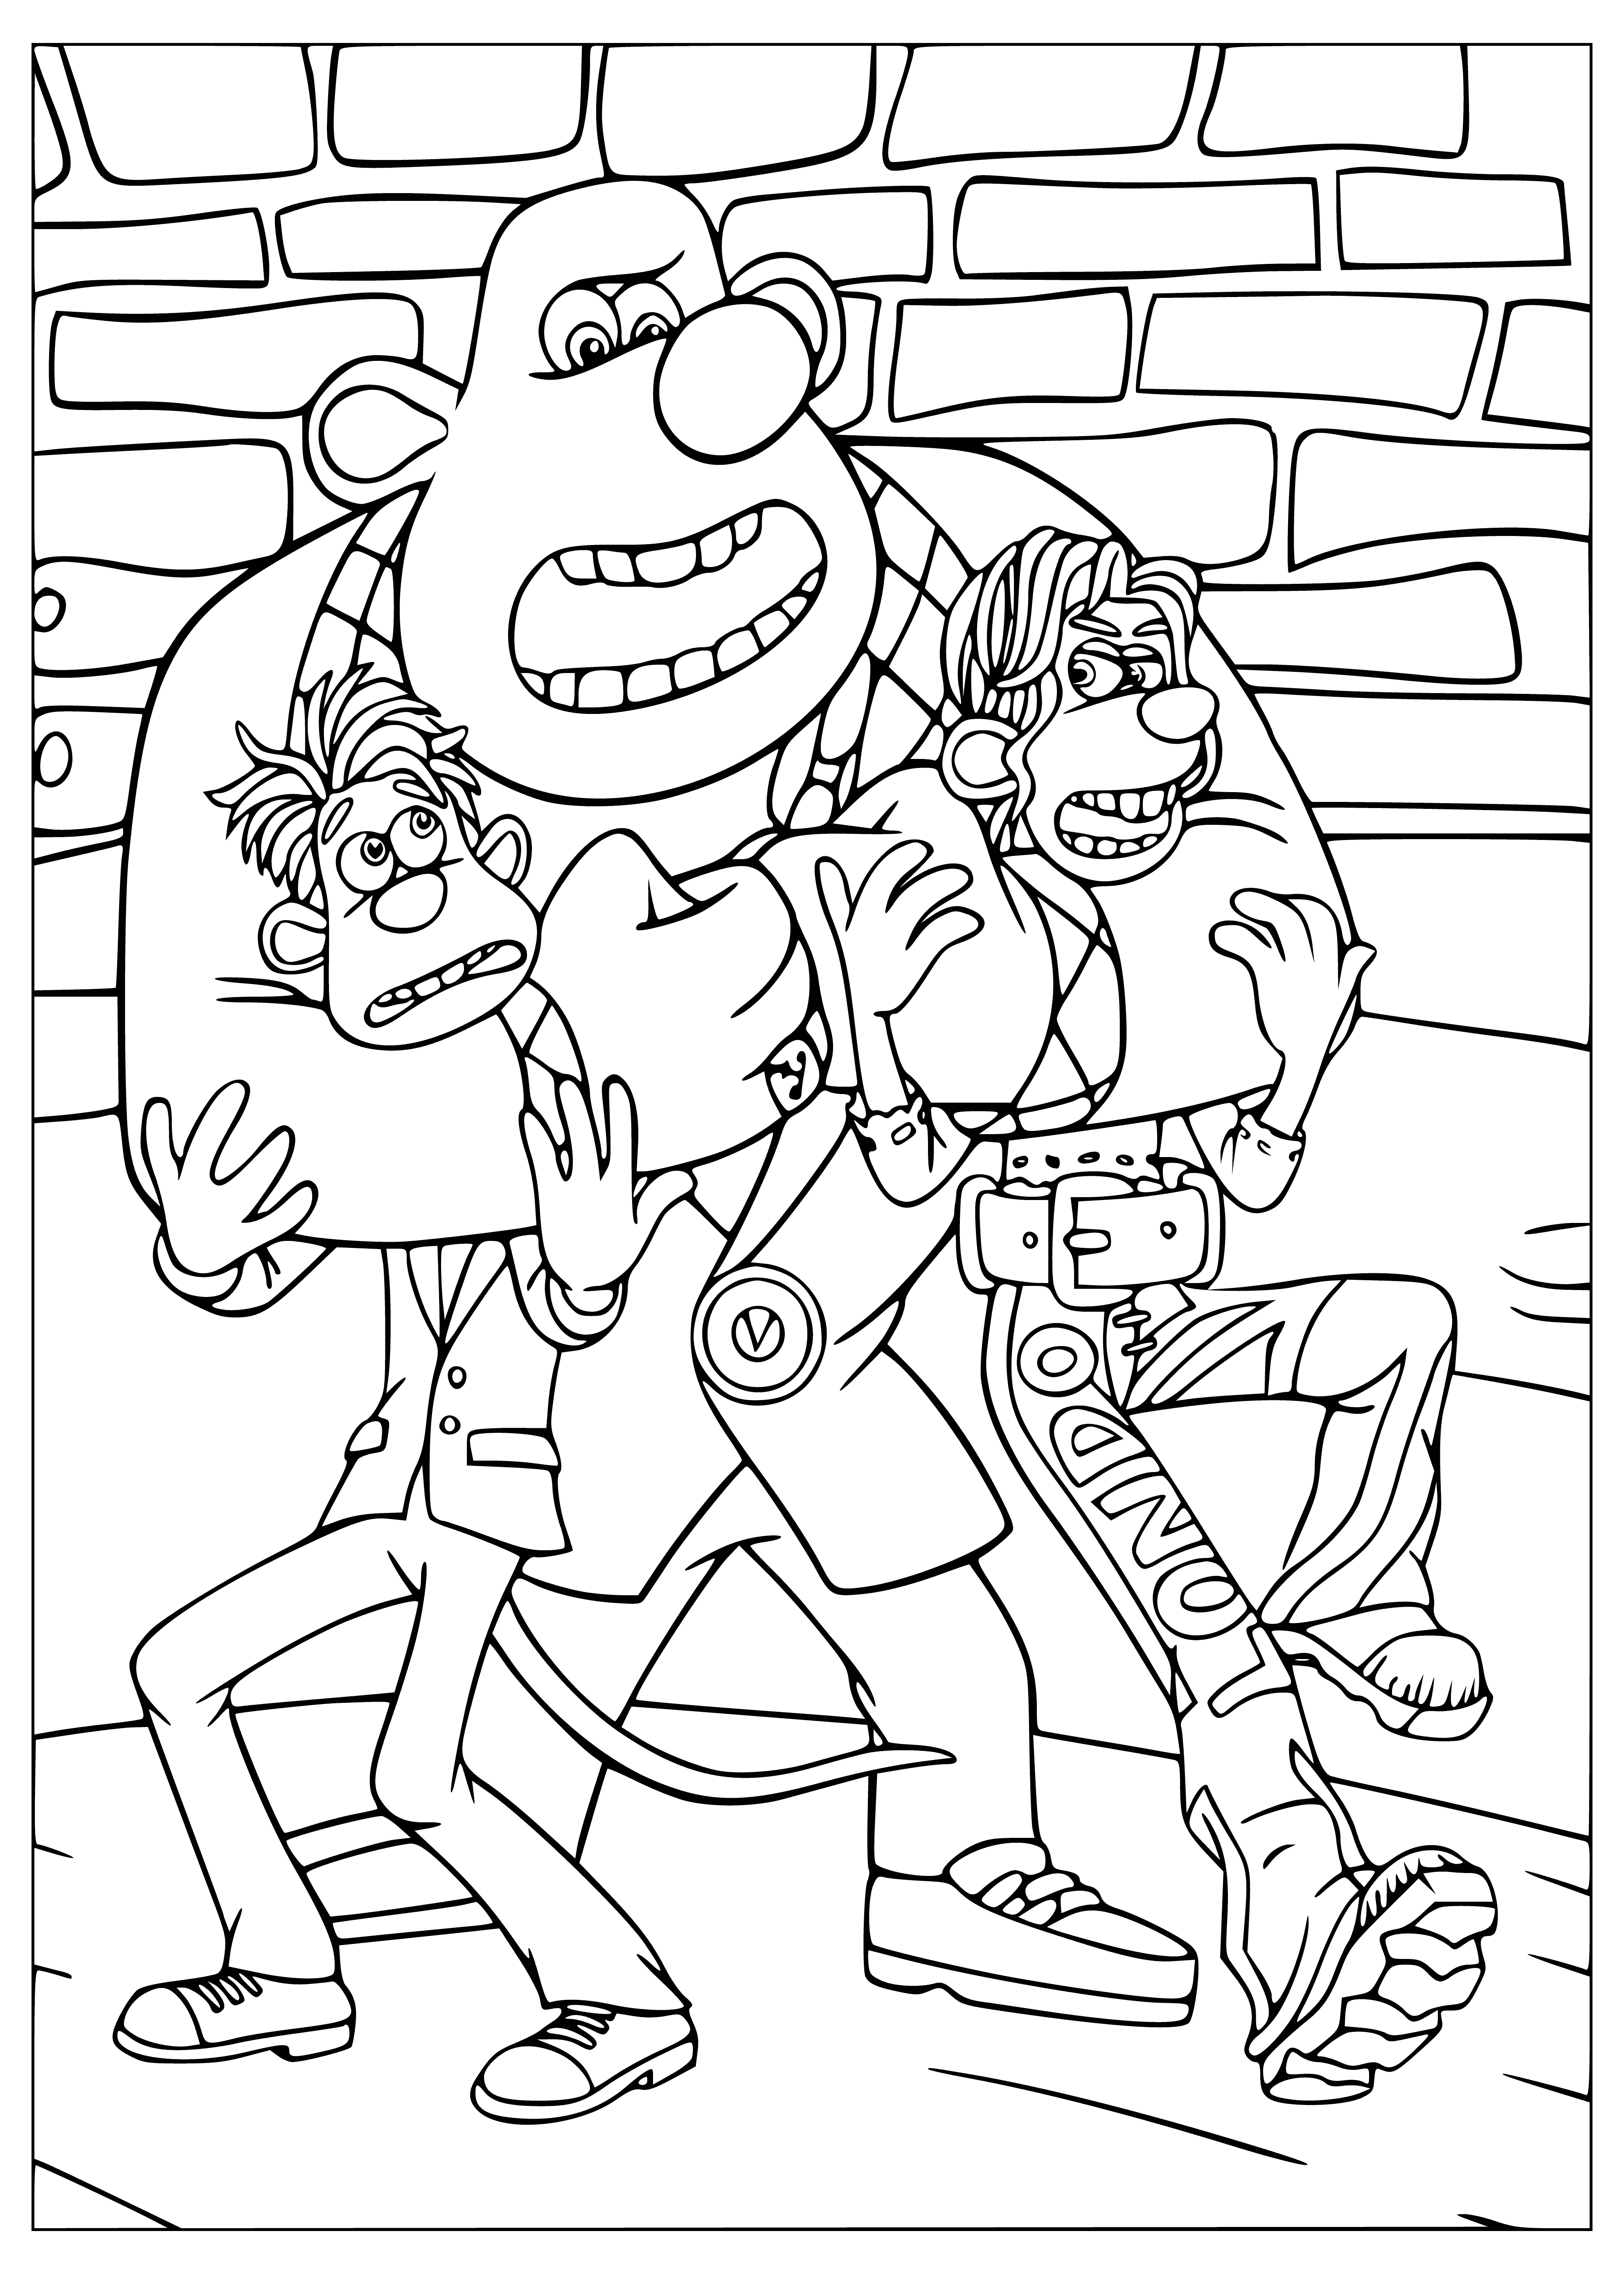 Roddy and Rita in the hands of bandits coloring page